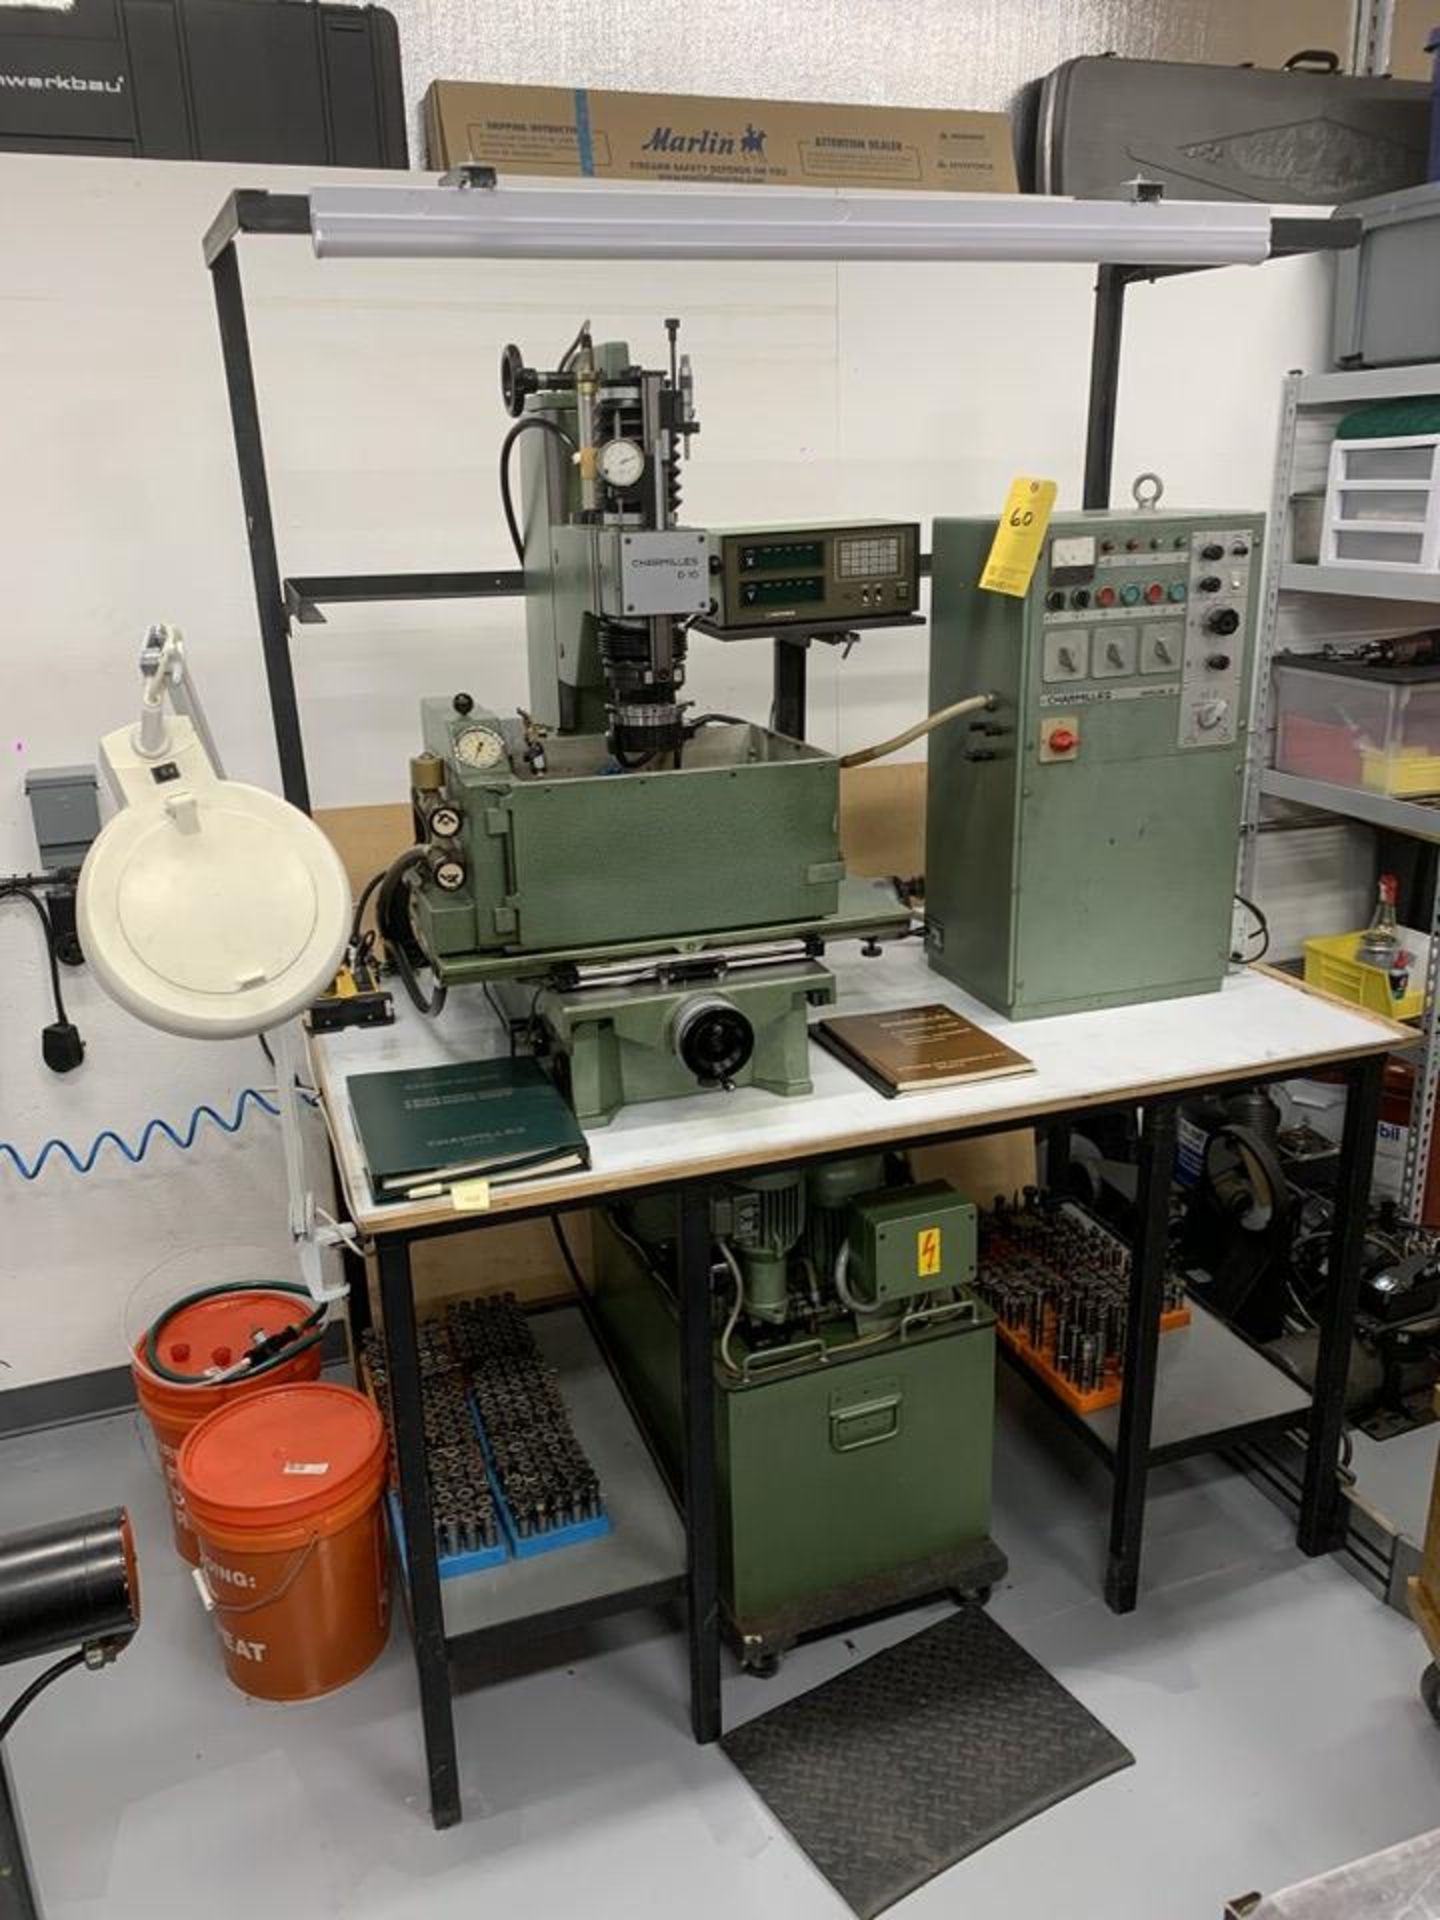 CHARMILLES D10 EDM MACHINE, 9" X 14" TABLE, 4" X 7" MAGNETIC CHUCK, MITUTOYO DRO, ASSORT TOOLING